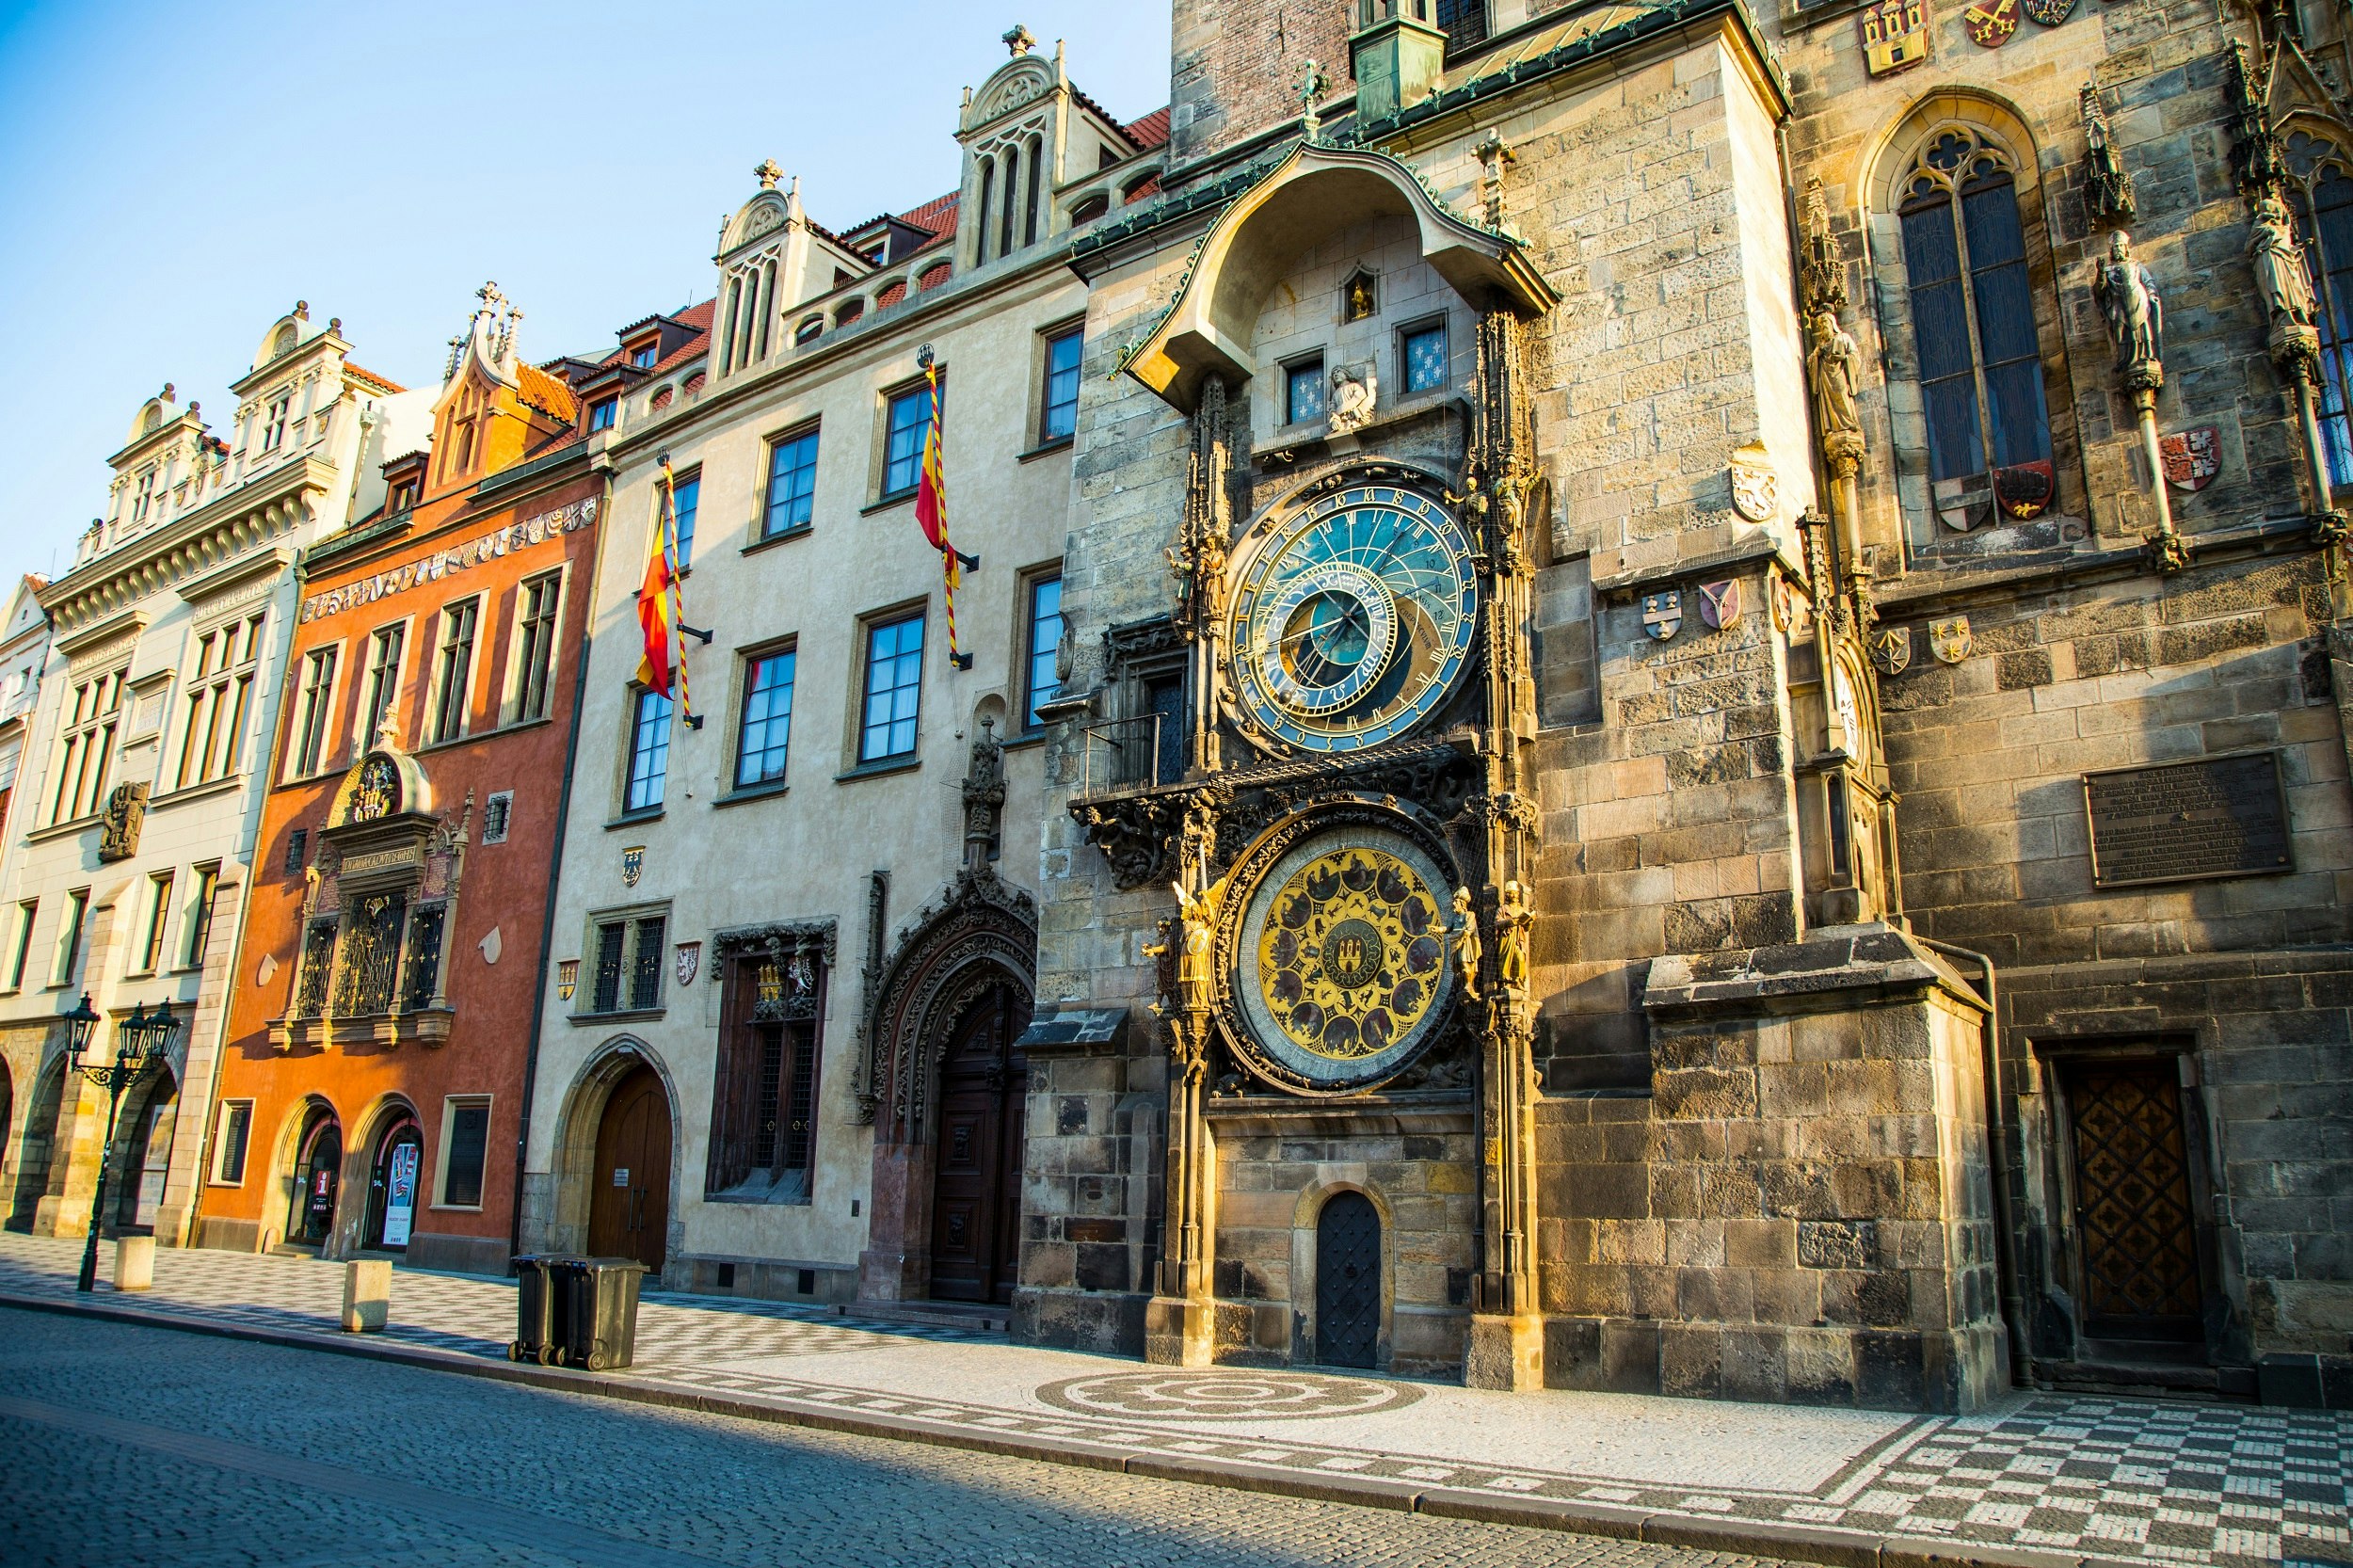 A large astronomical clock with several faces covers the side of a three-storey building